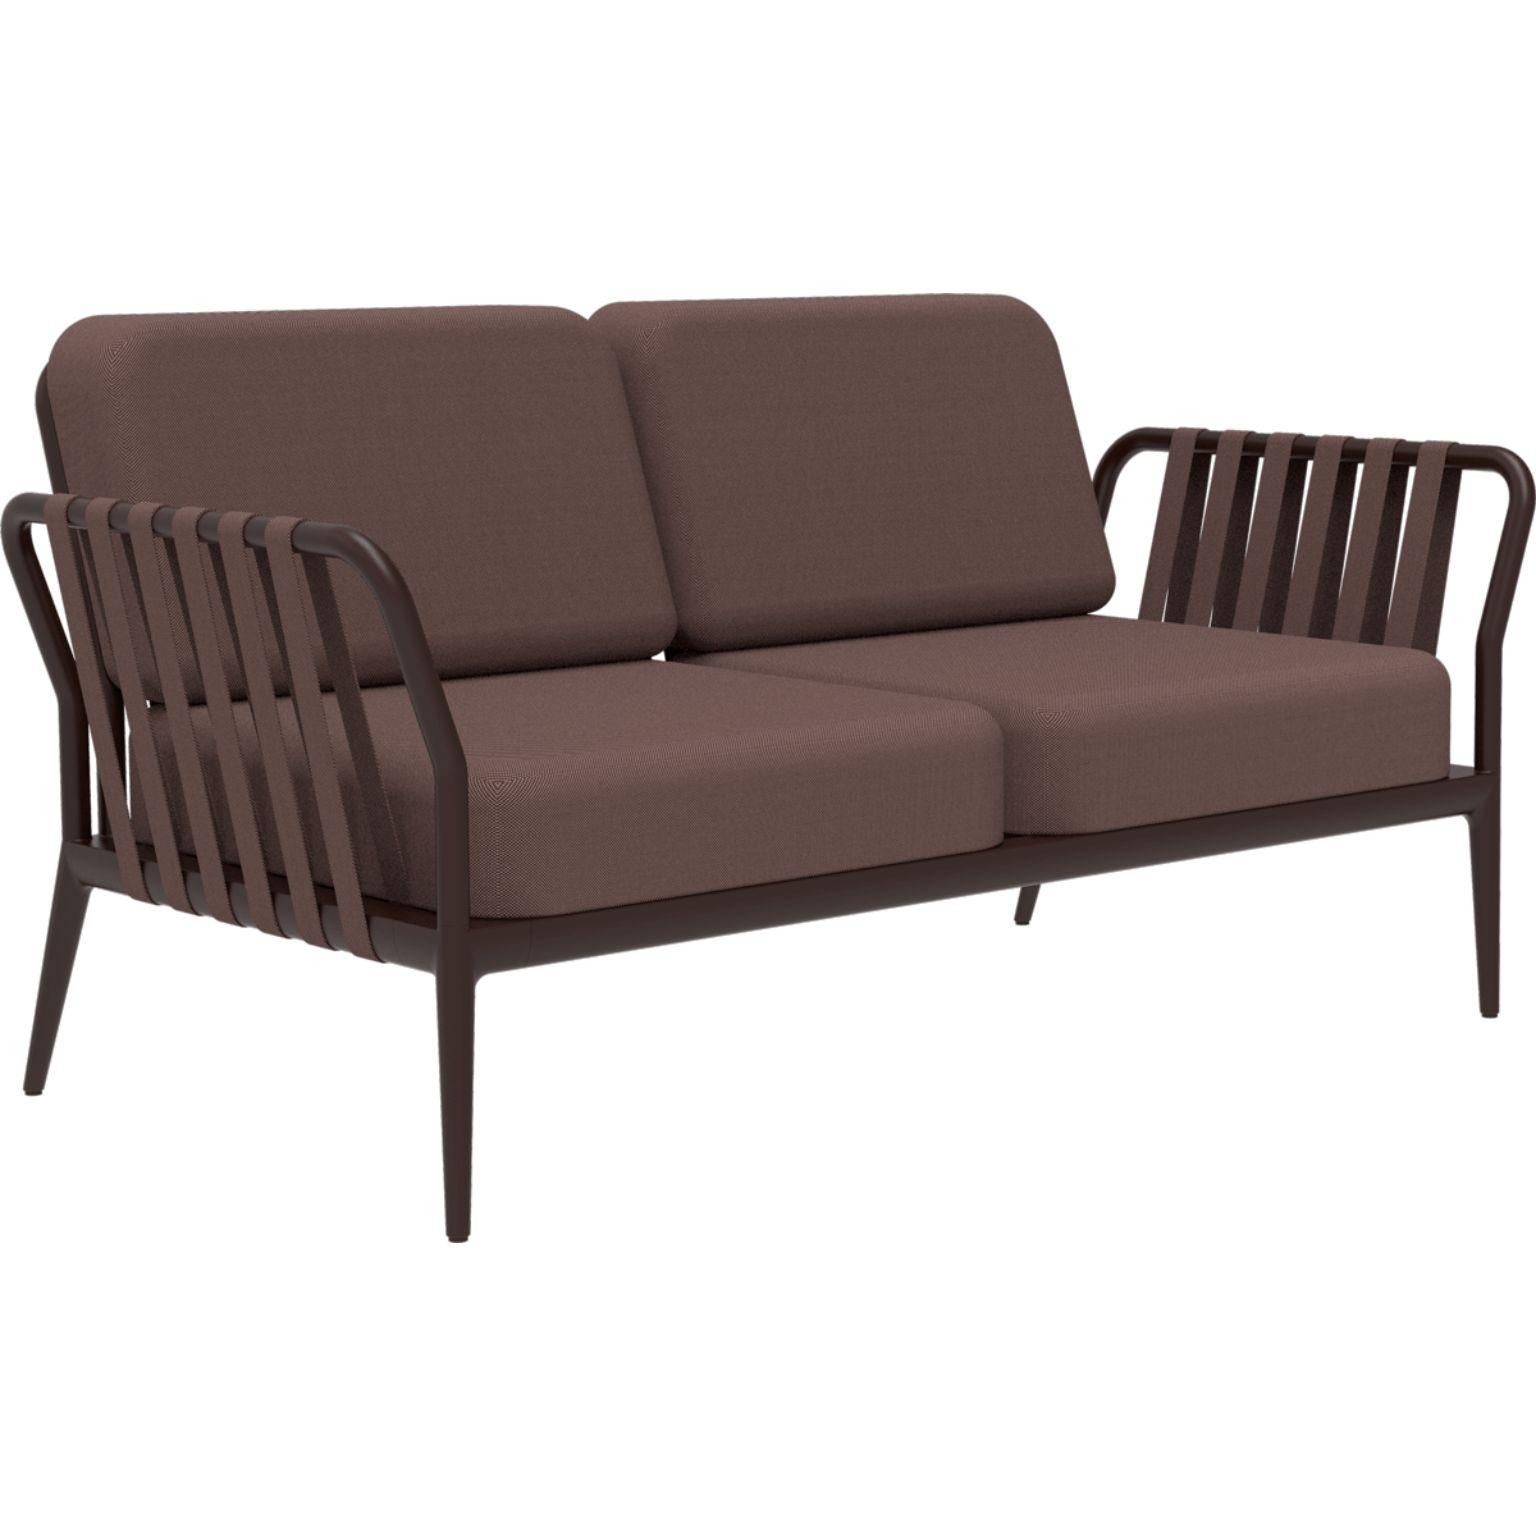 Ribbons chocolate sofa by MOWEE
Dimensions: D83 x W160 x H81 cm
Material: Aluminum, Upholstery
Weight: 32 kg
Also available in different colors and finishes. 

An unmistakable collection for its beauty and robustness. A tribute to the